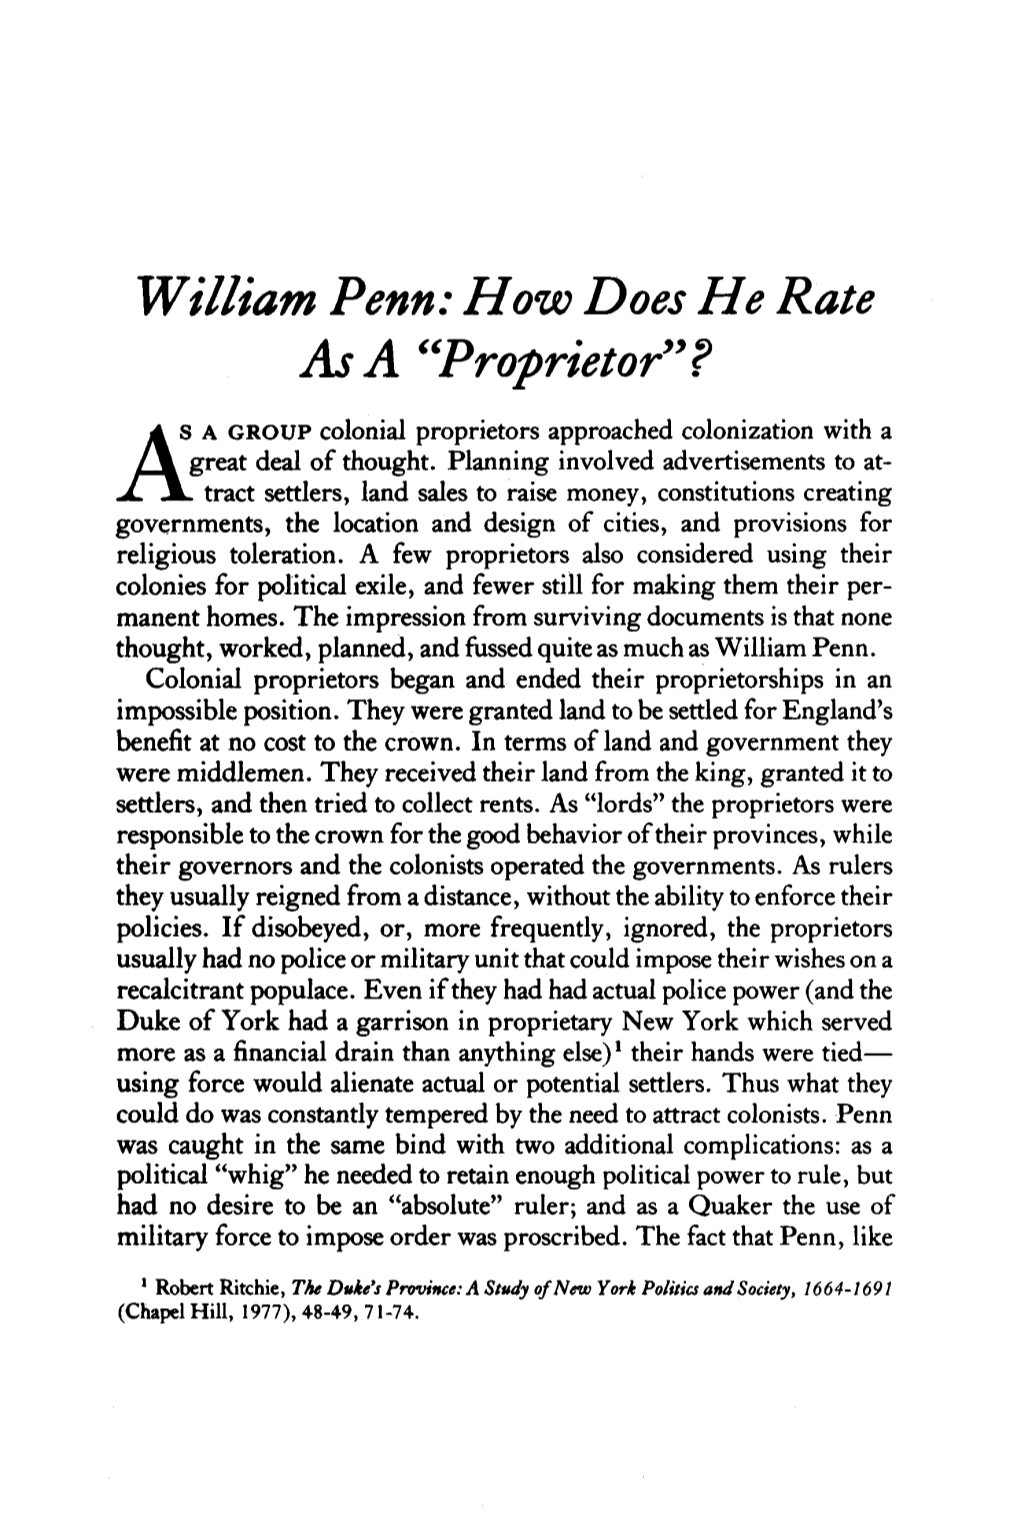 William Penn: How Does He Rate As a "Proprietor"?